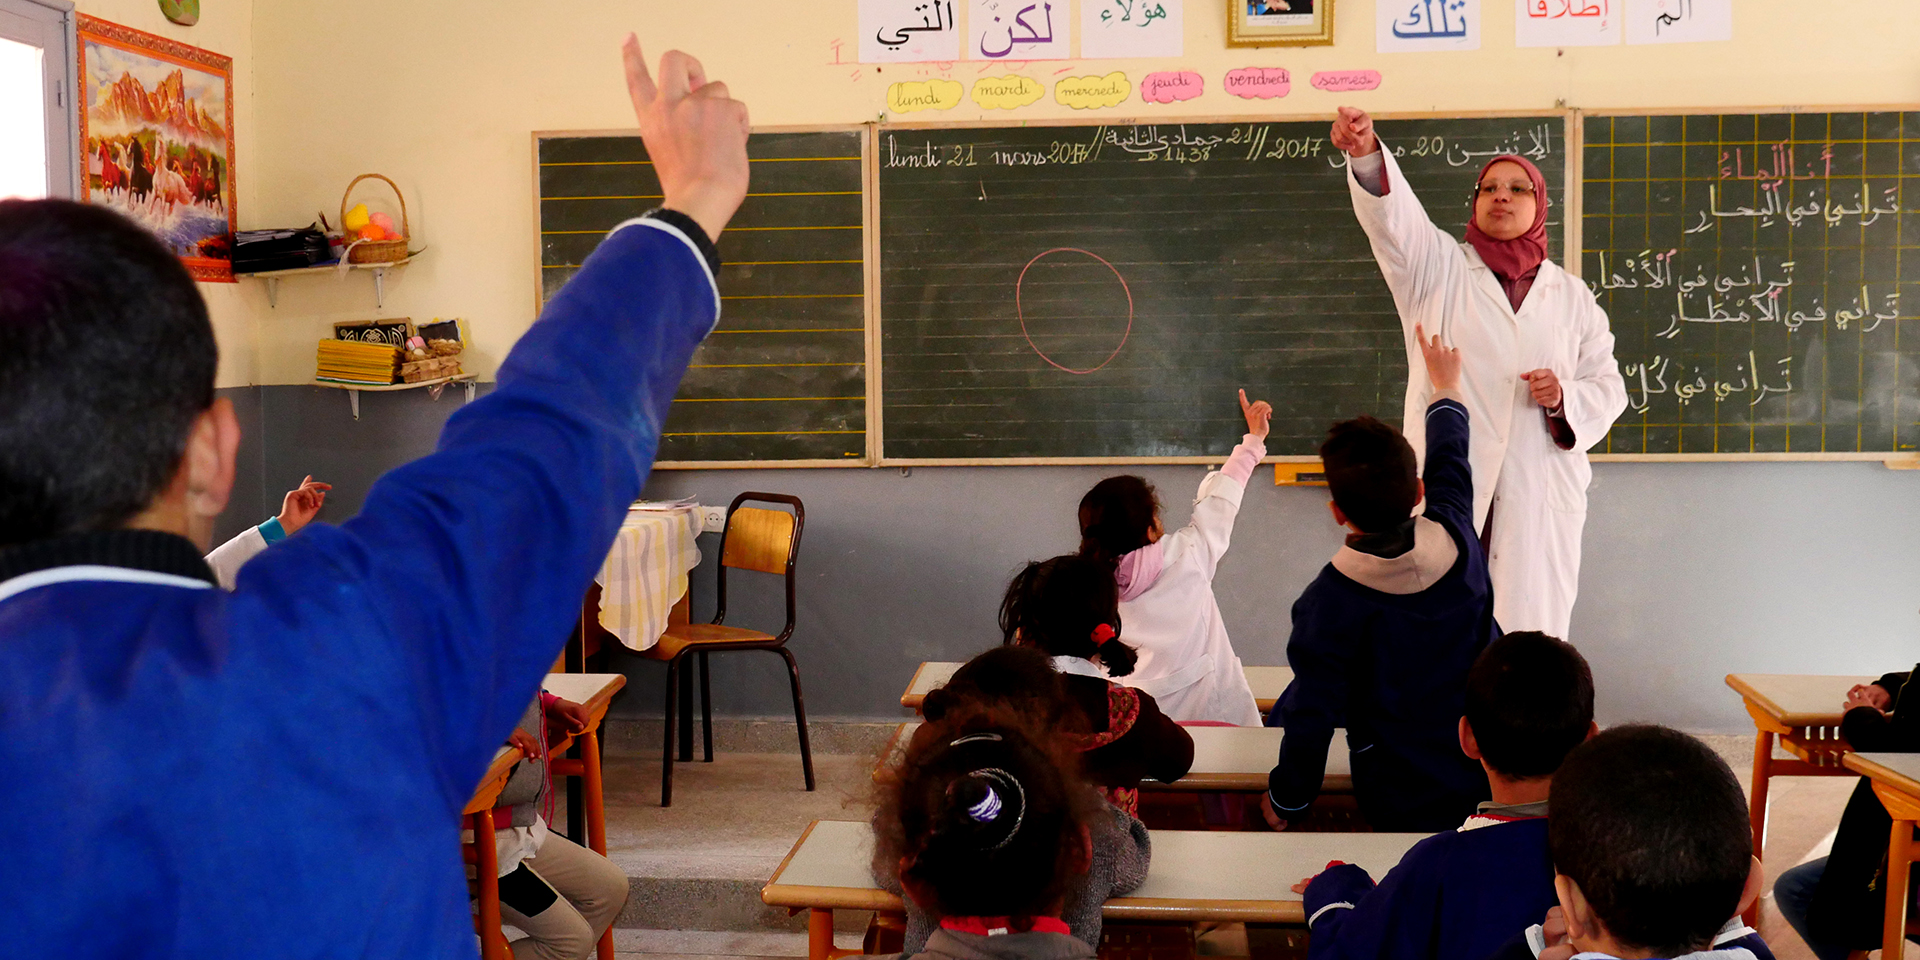 A schoolroom filled with children at desks with several raising their hands. A teacher standing in front of a chalkboard points to one of the students raising their hands in the back of the room.